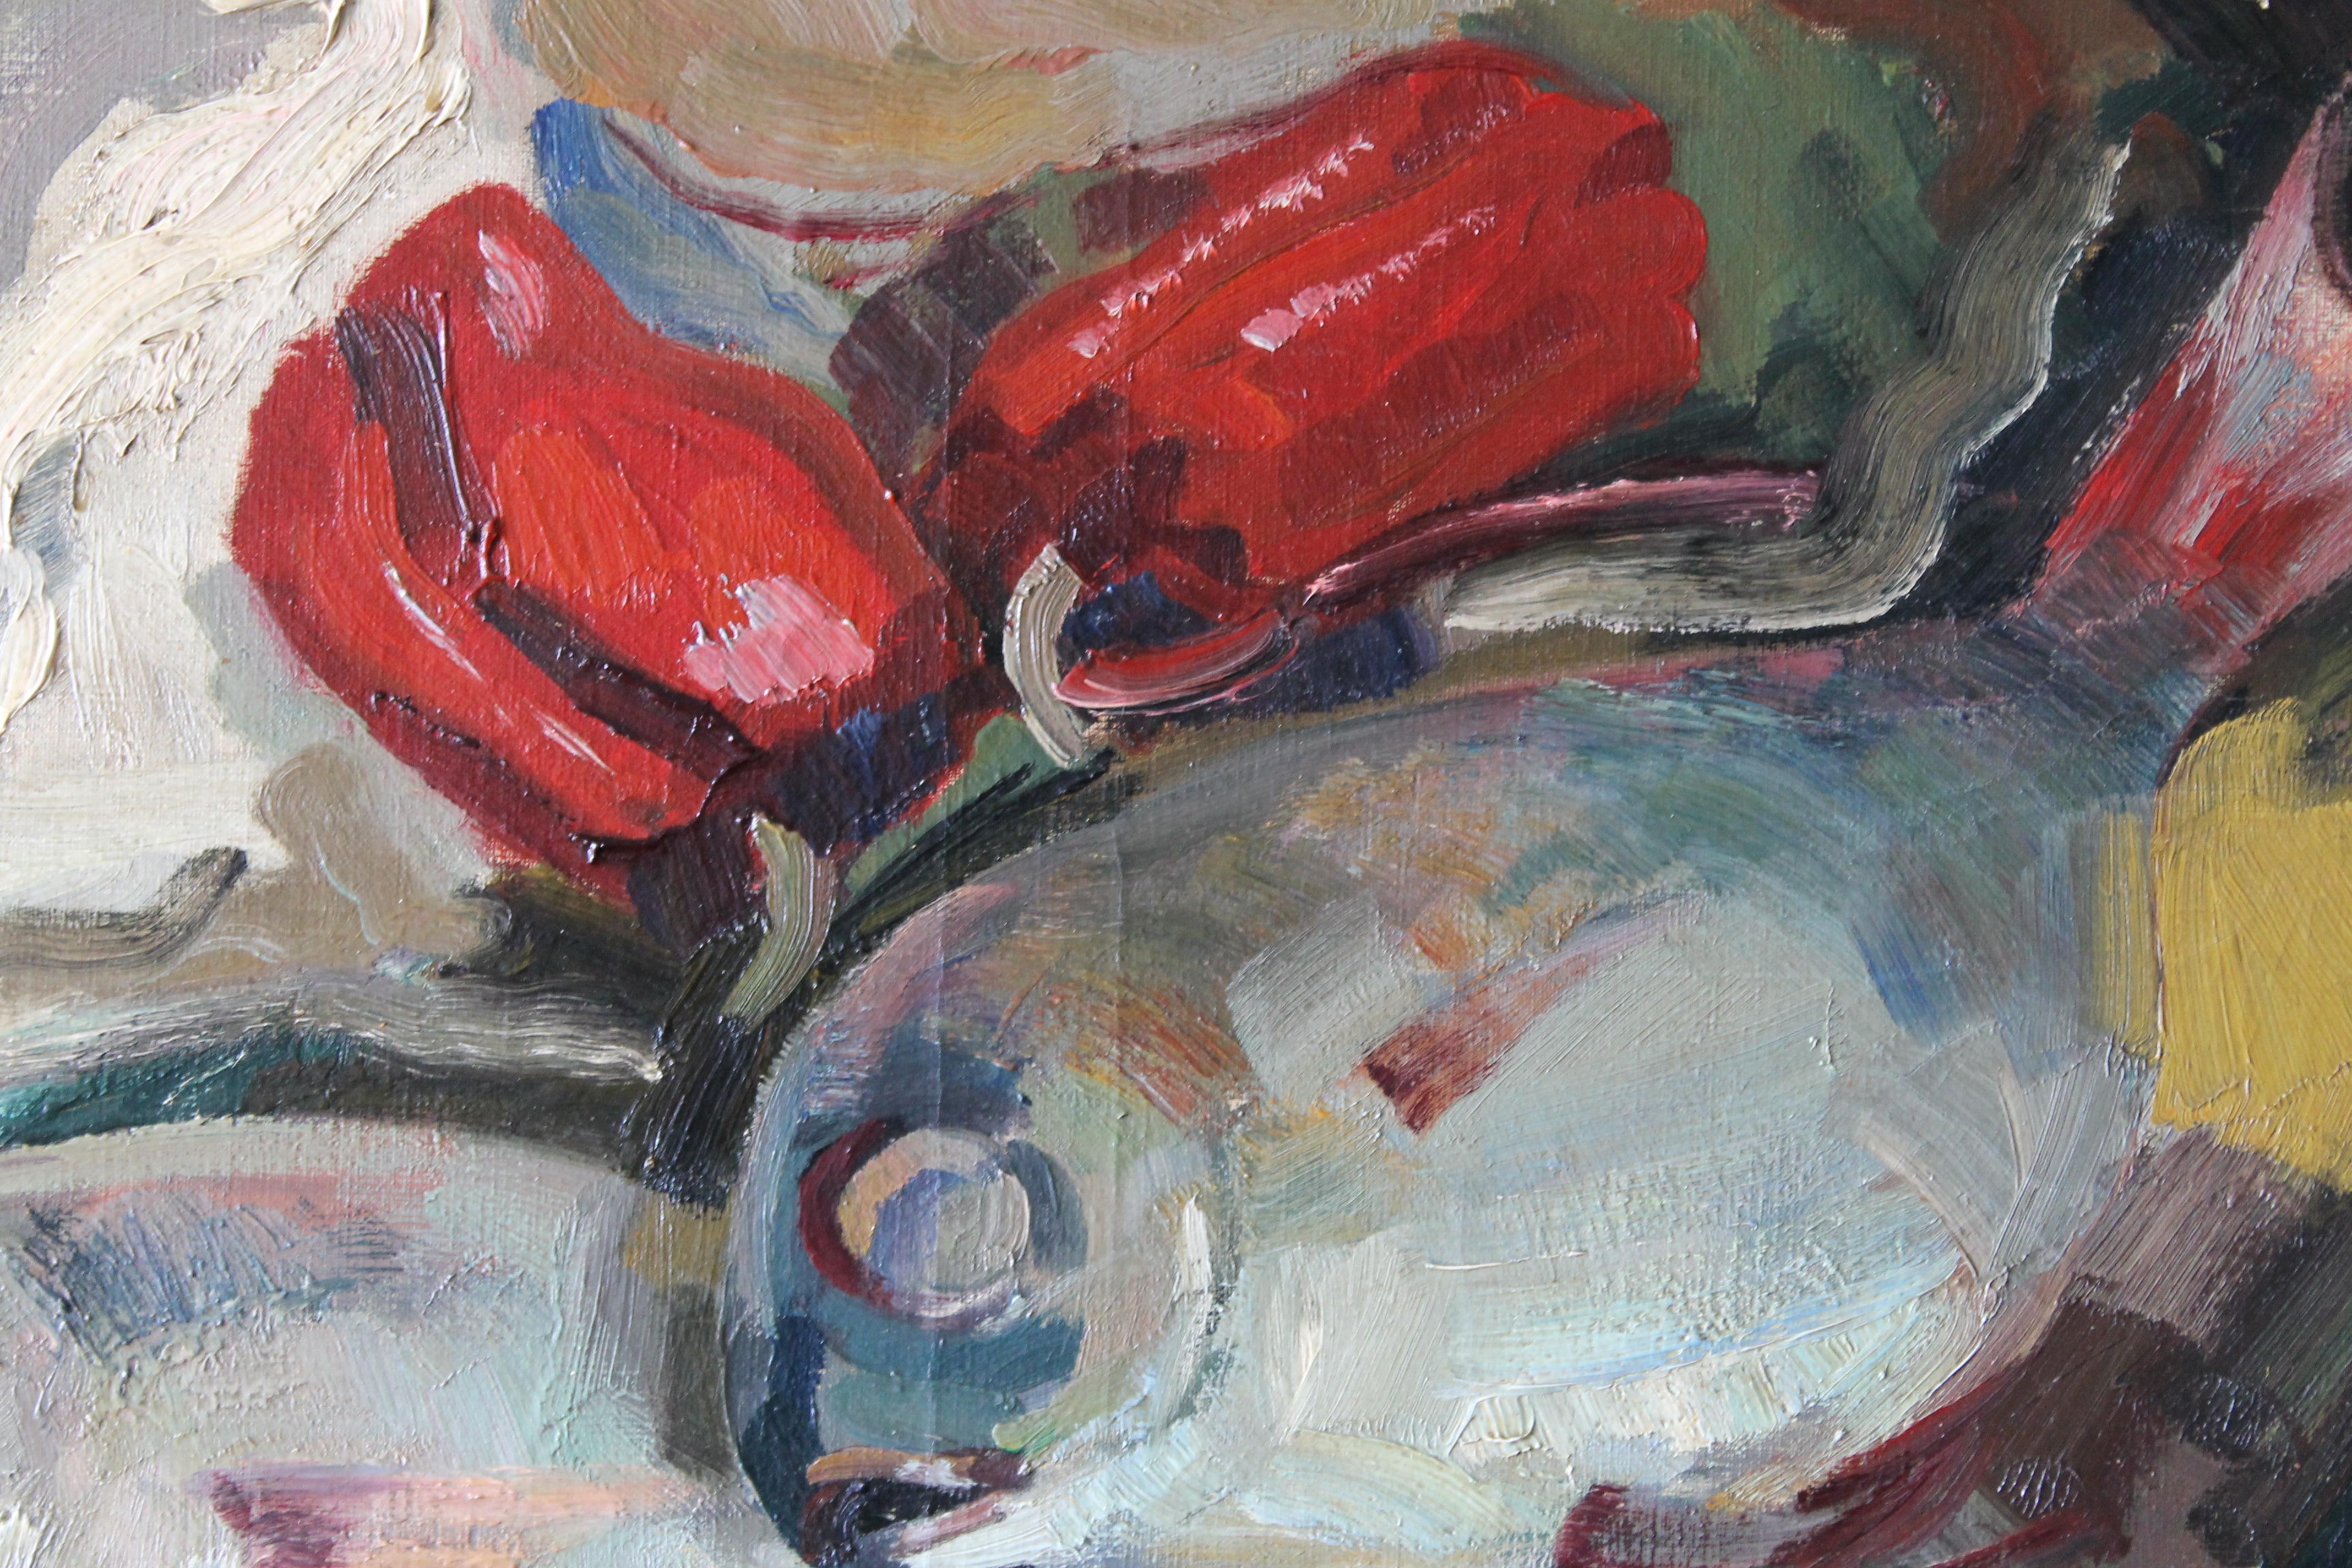 Vintage French still life oil painting of fish by French artist, Francois Mengelatte (1920-2009). Impressionist sea bream and red peppers.  It's a large size canvas, ideal for a kitchen or dining setting.  A textured canvas painted with verve and